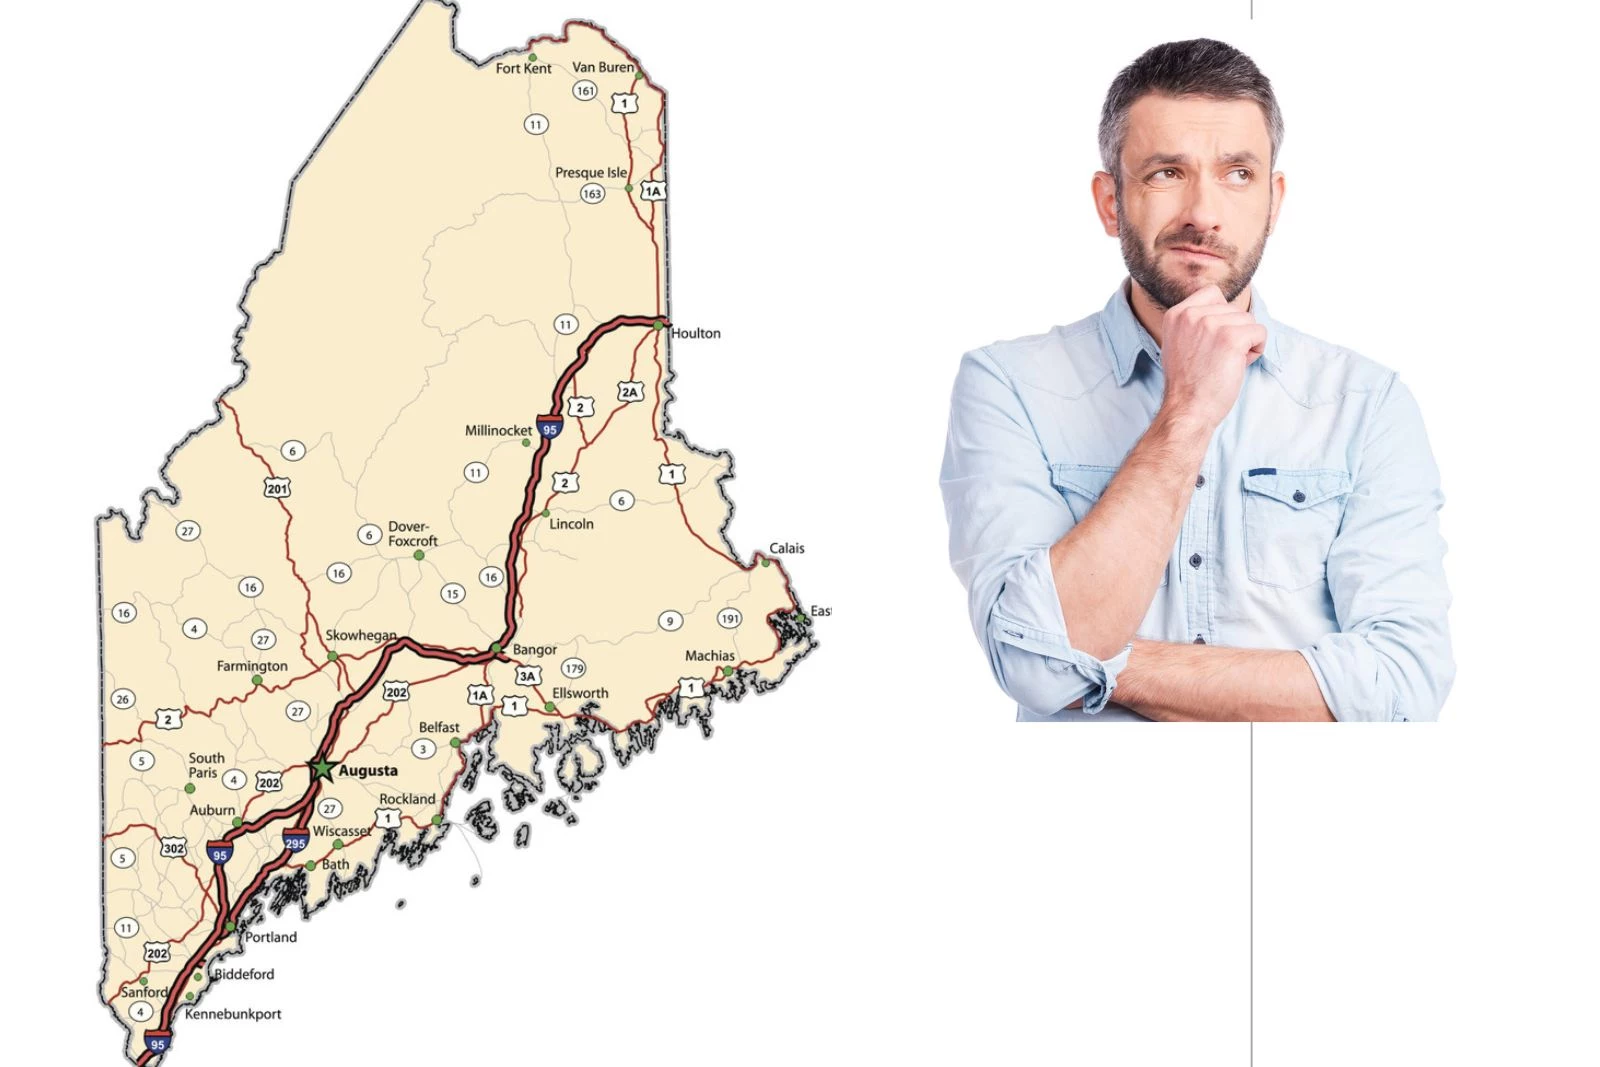 Livin’ the American Dream in Maine? Here’s What That Actually
Costs